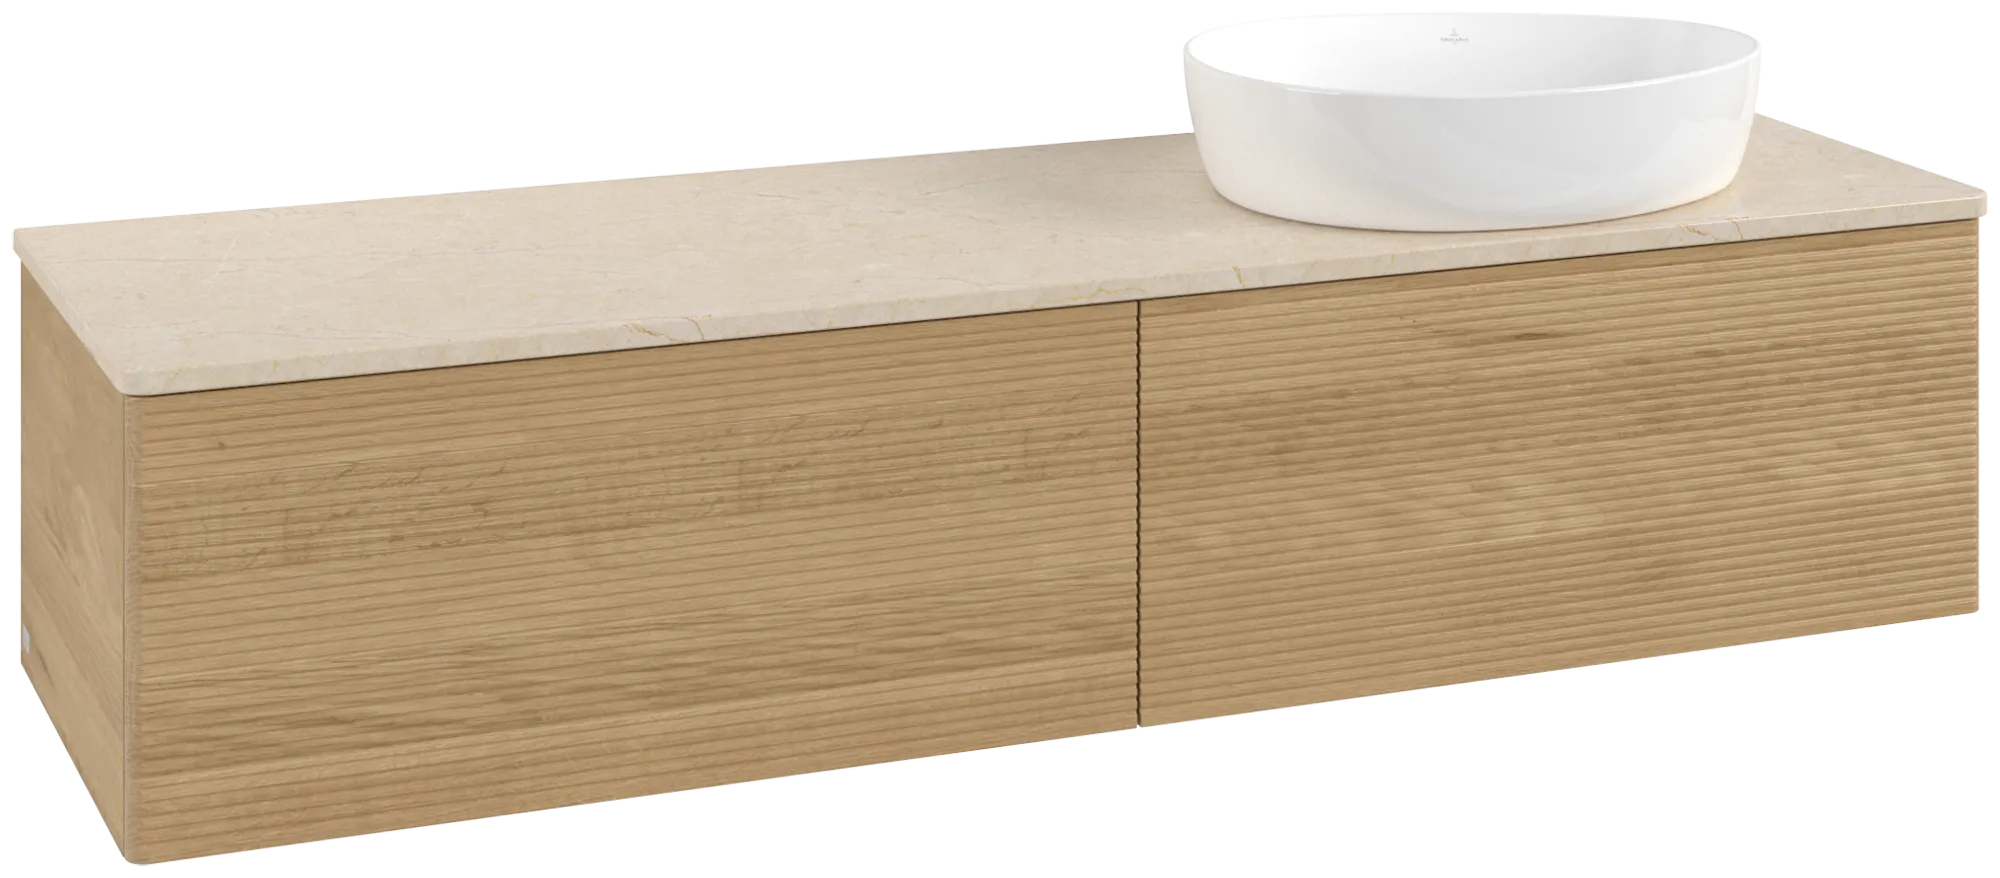 Picture of VILLEROY BOCH Antao Vanity unit, with lighting, 2 pull-out compartments, 1600 x 360 x 500 mm, Front with grain texture, Honey Oak / Botticino #L38113HN